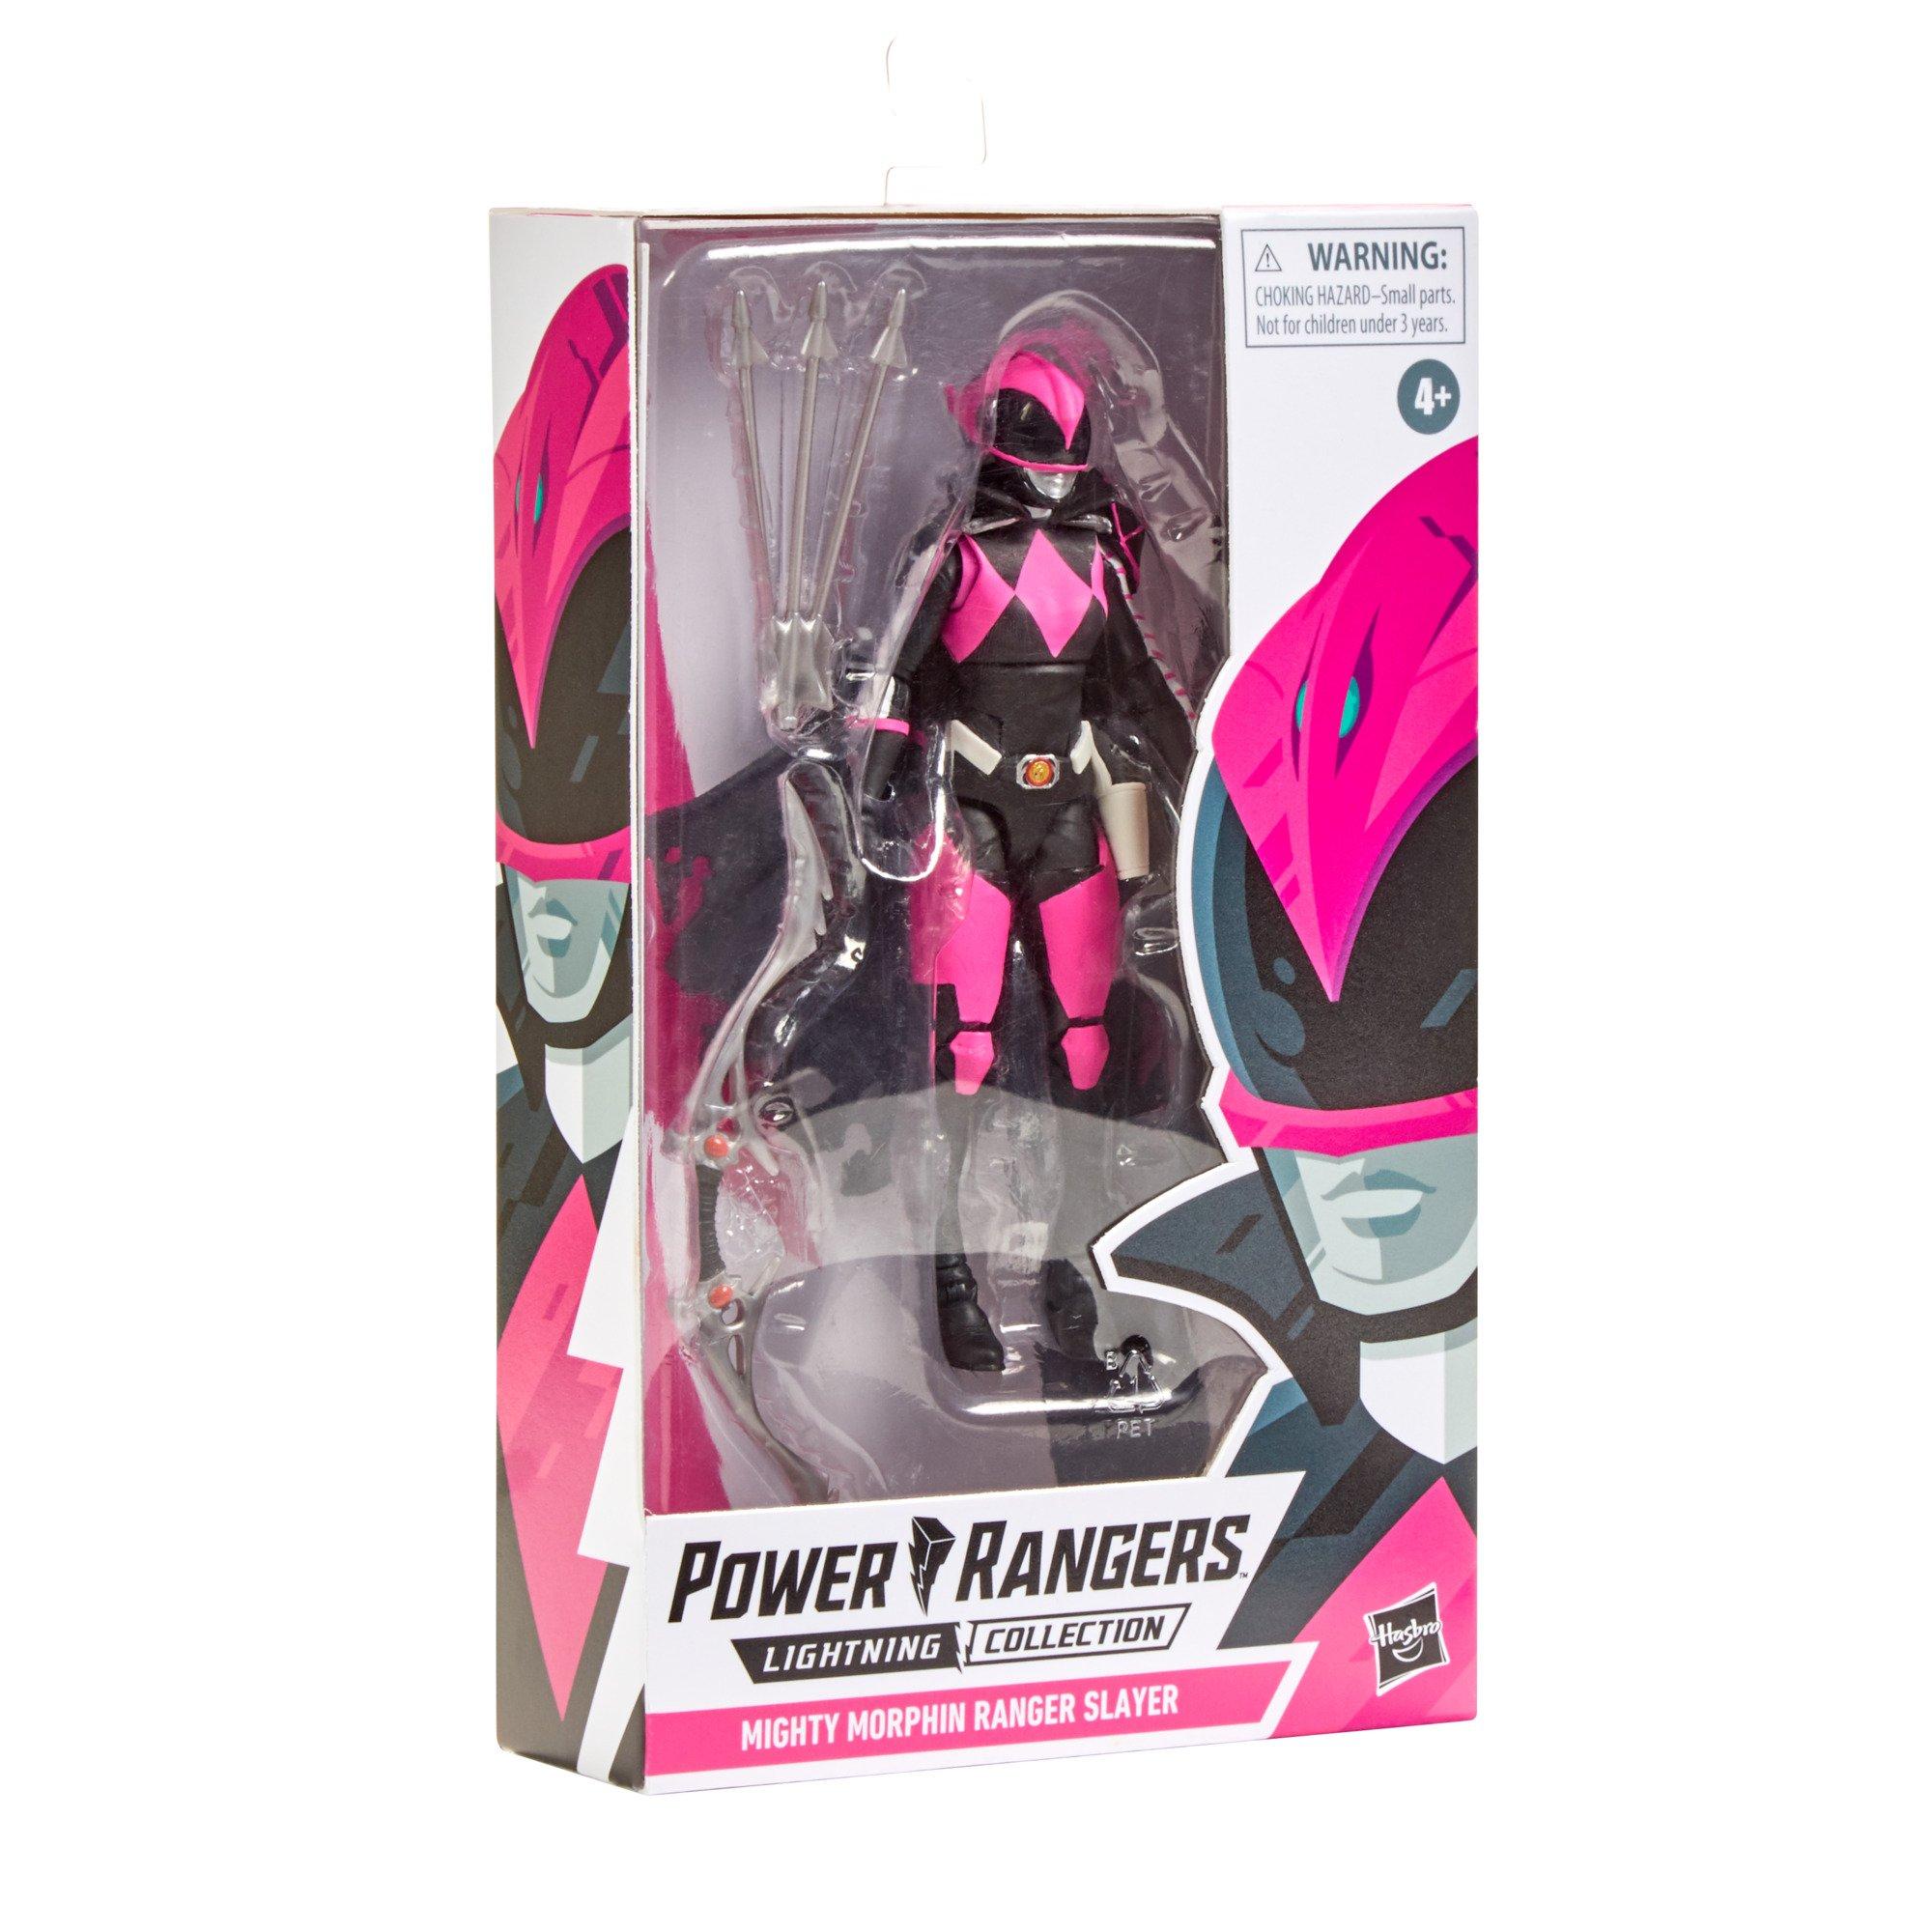 Hasbro Mighty Morphin Power Rangers Ranger Slayer Lightning Collection 6-in Action Figure